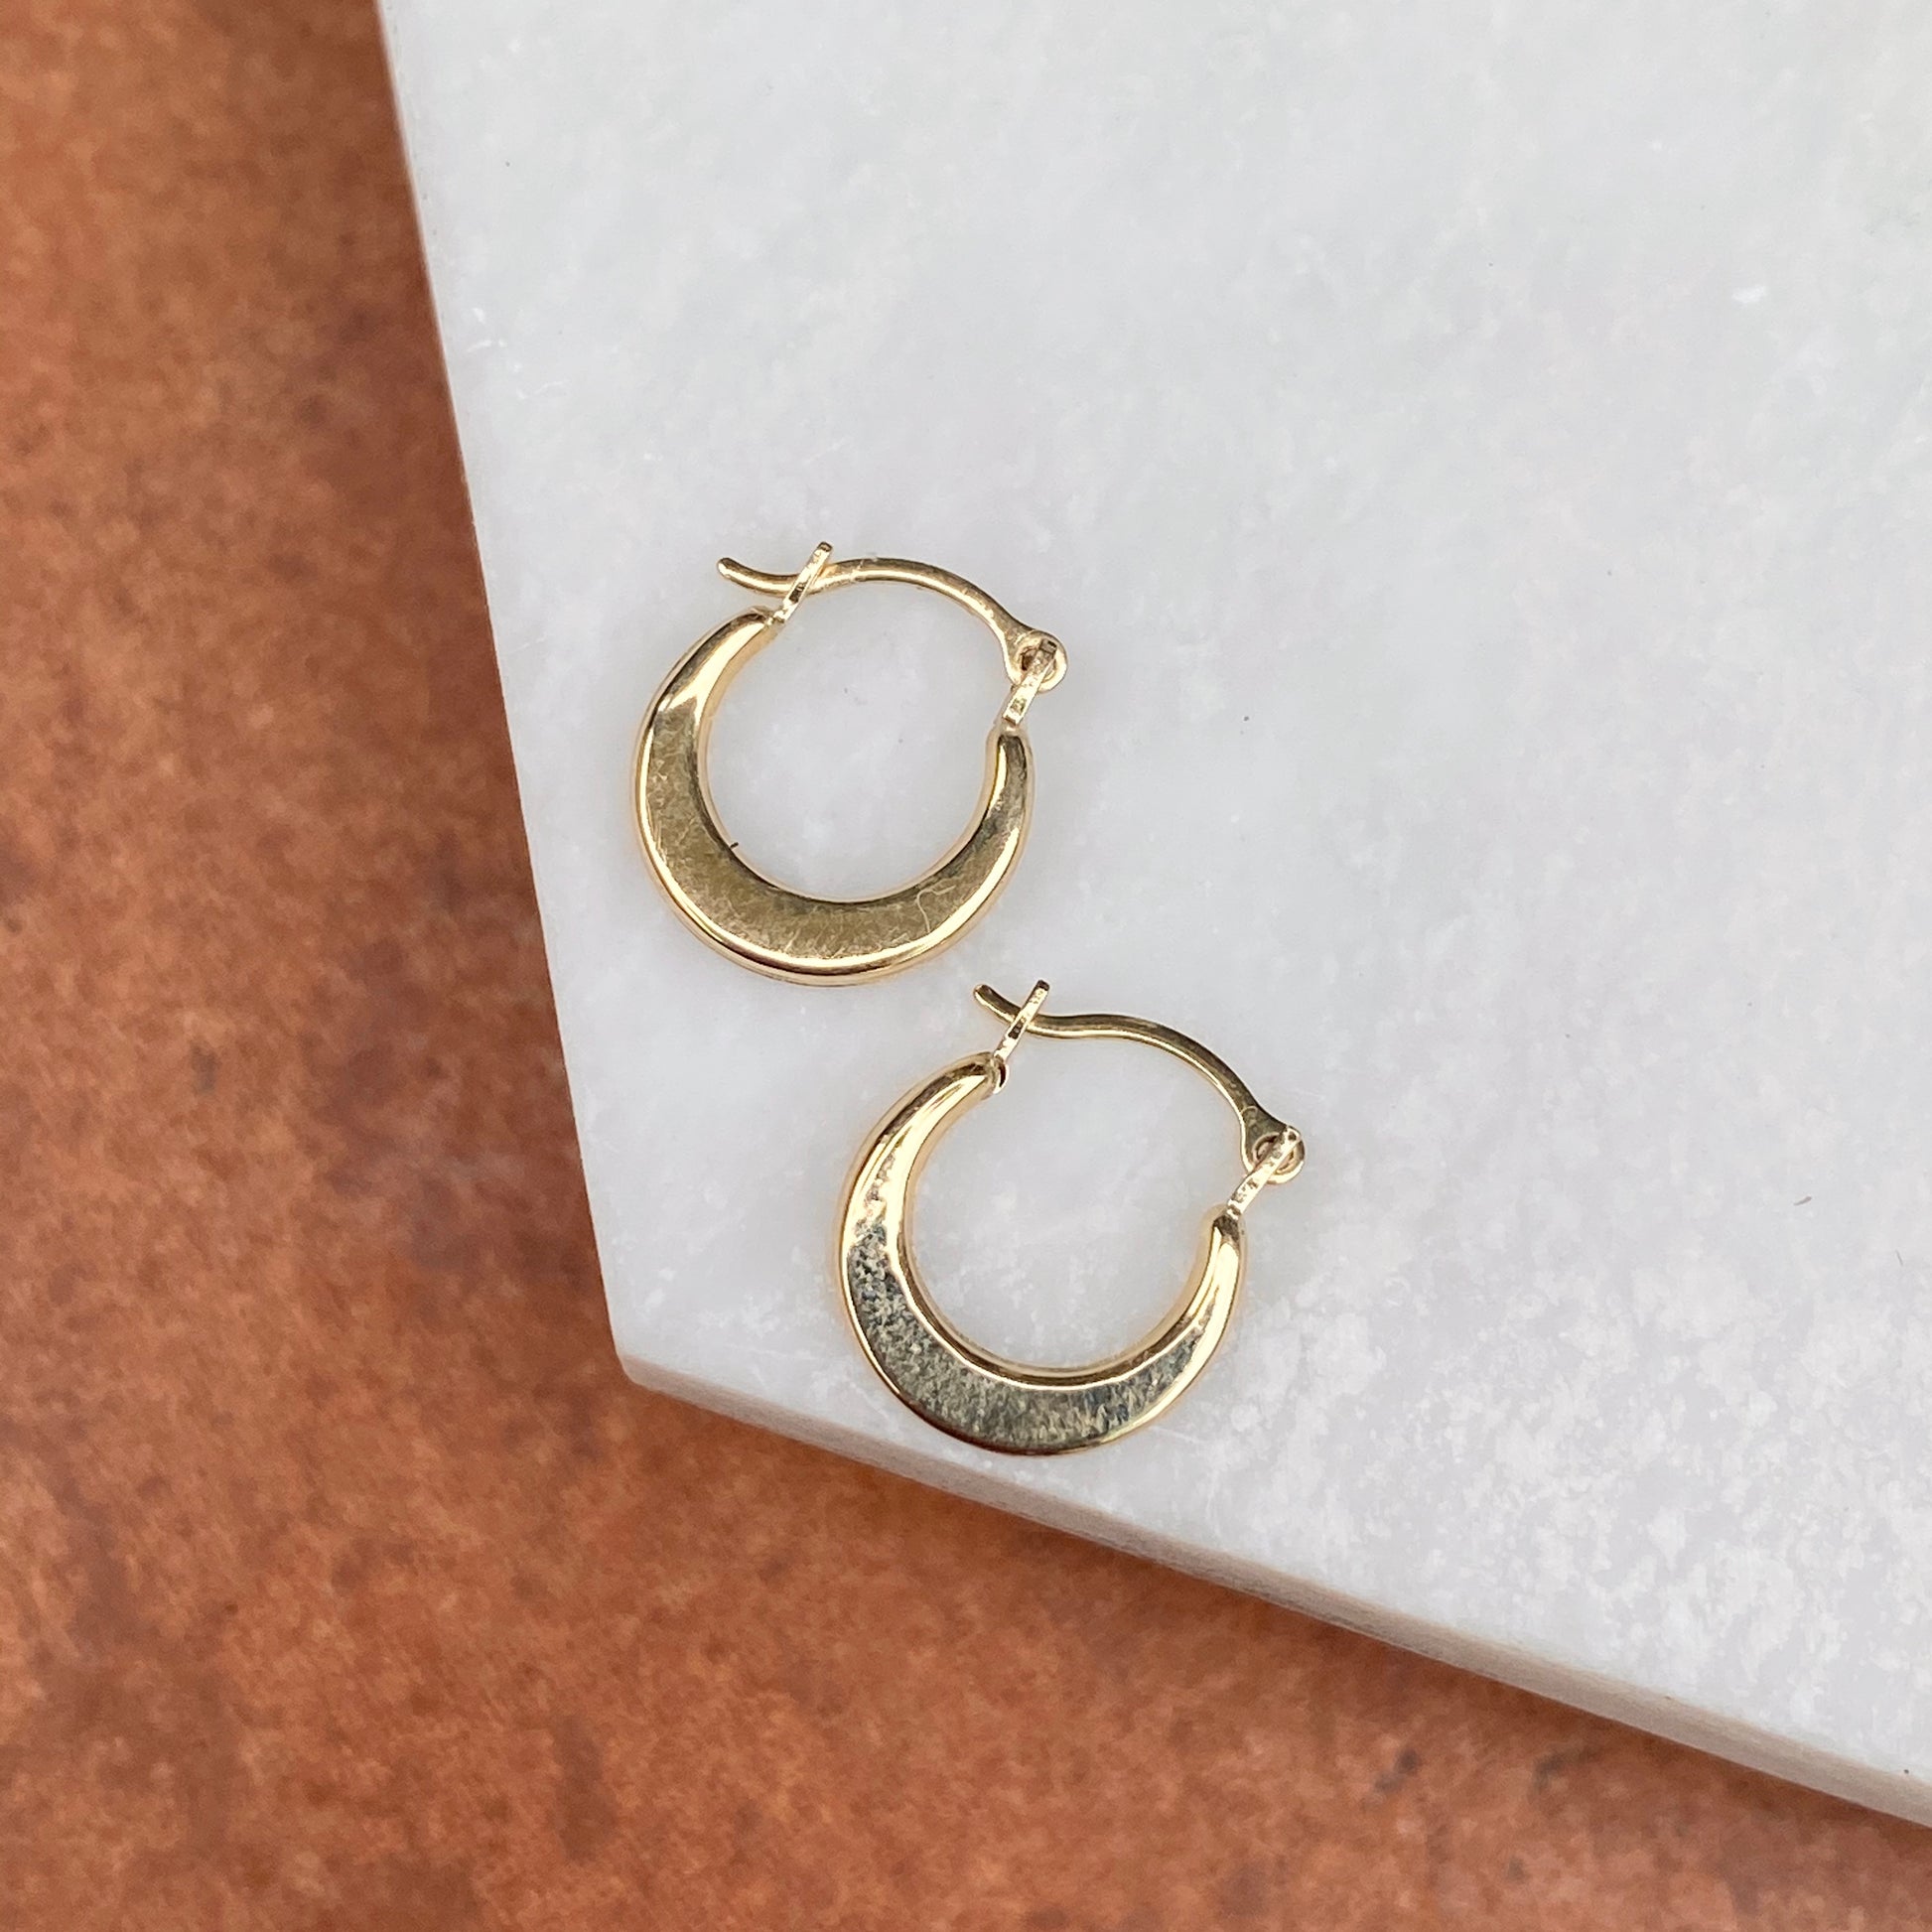 14KT Yellow Gold Polished Mini Hollow Hoop Earrings 10mm, 14KT Yellow Gold Polished Mini Hollow Hoop Earrings 10mm - Legacy Saint Jewelry